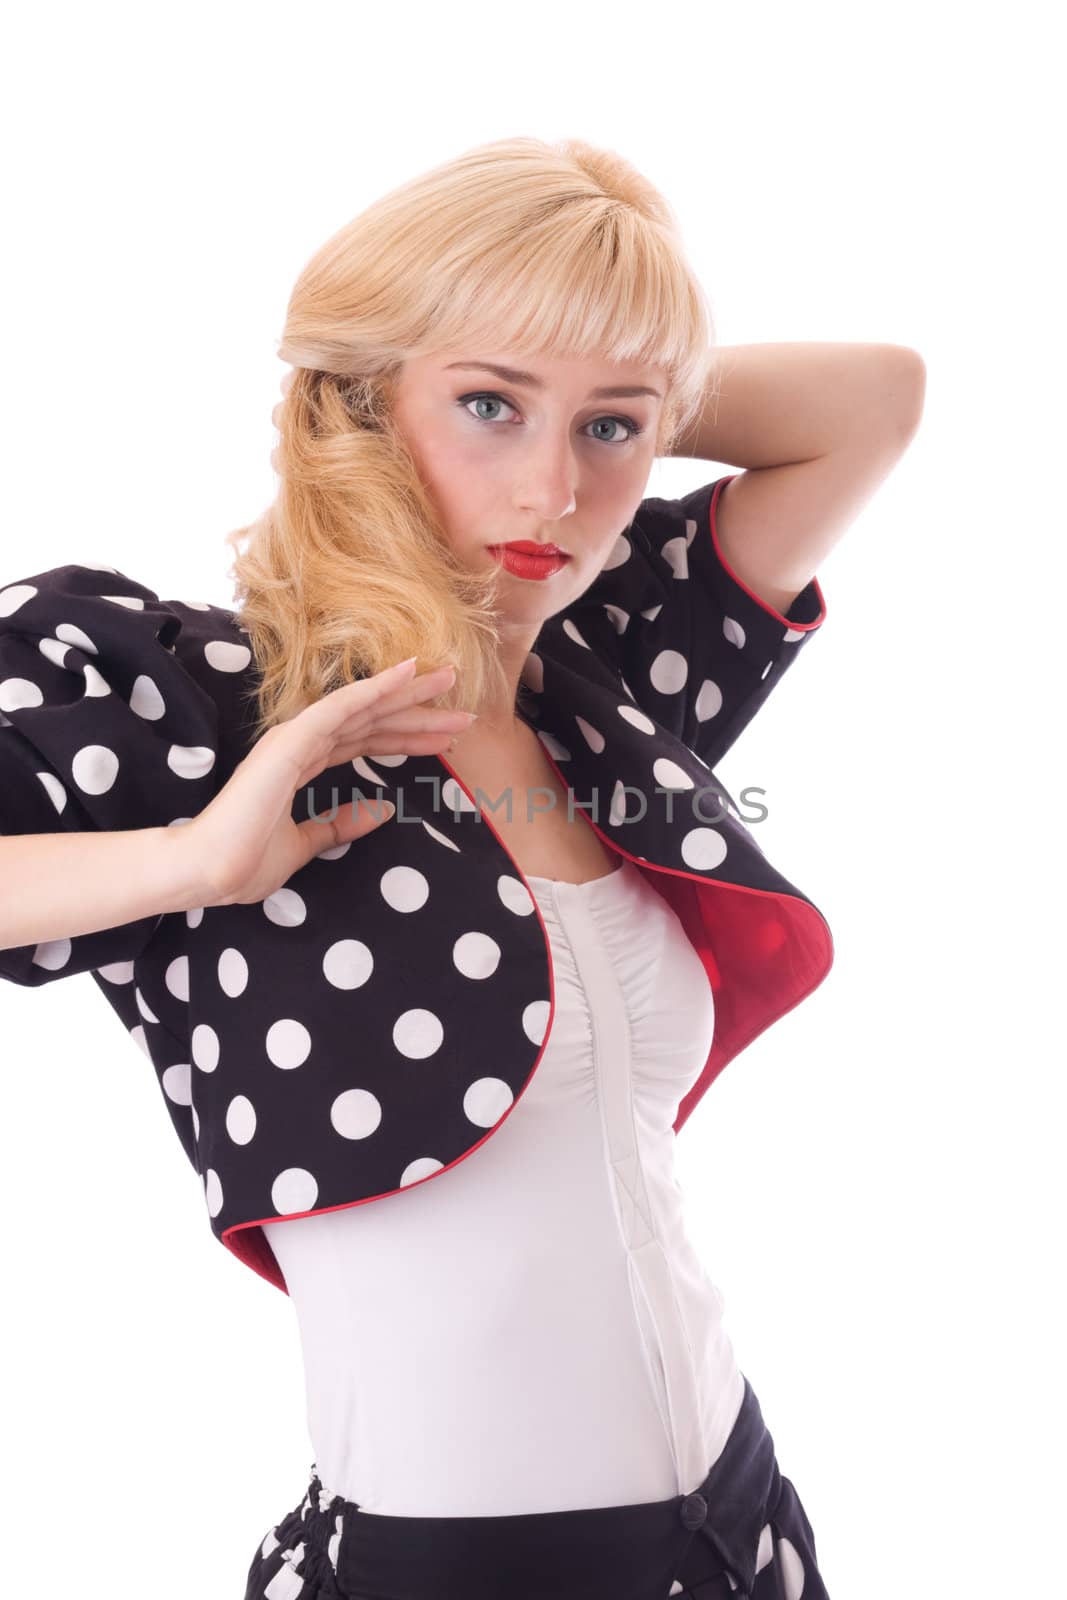 Attractive young woman in Polka dot coat